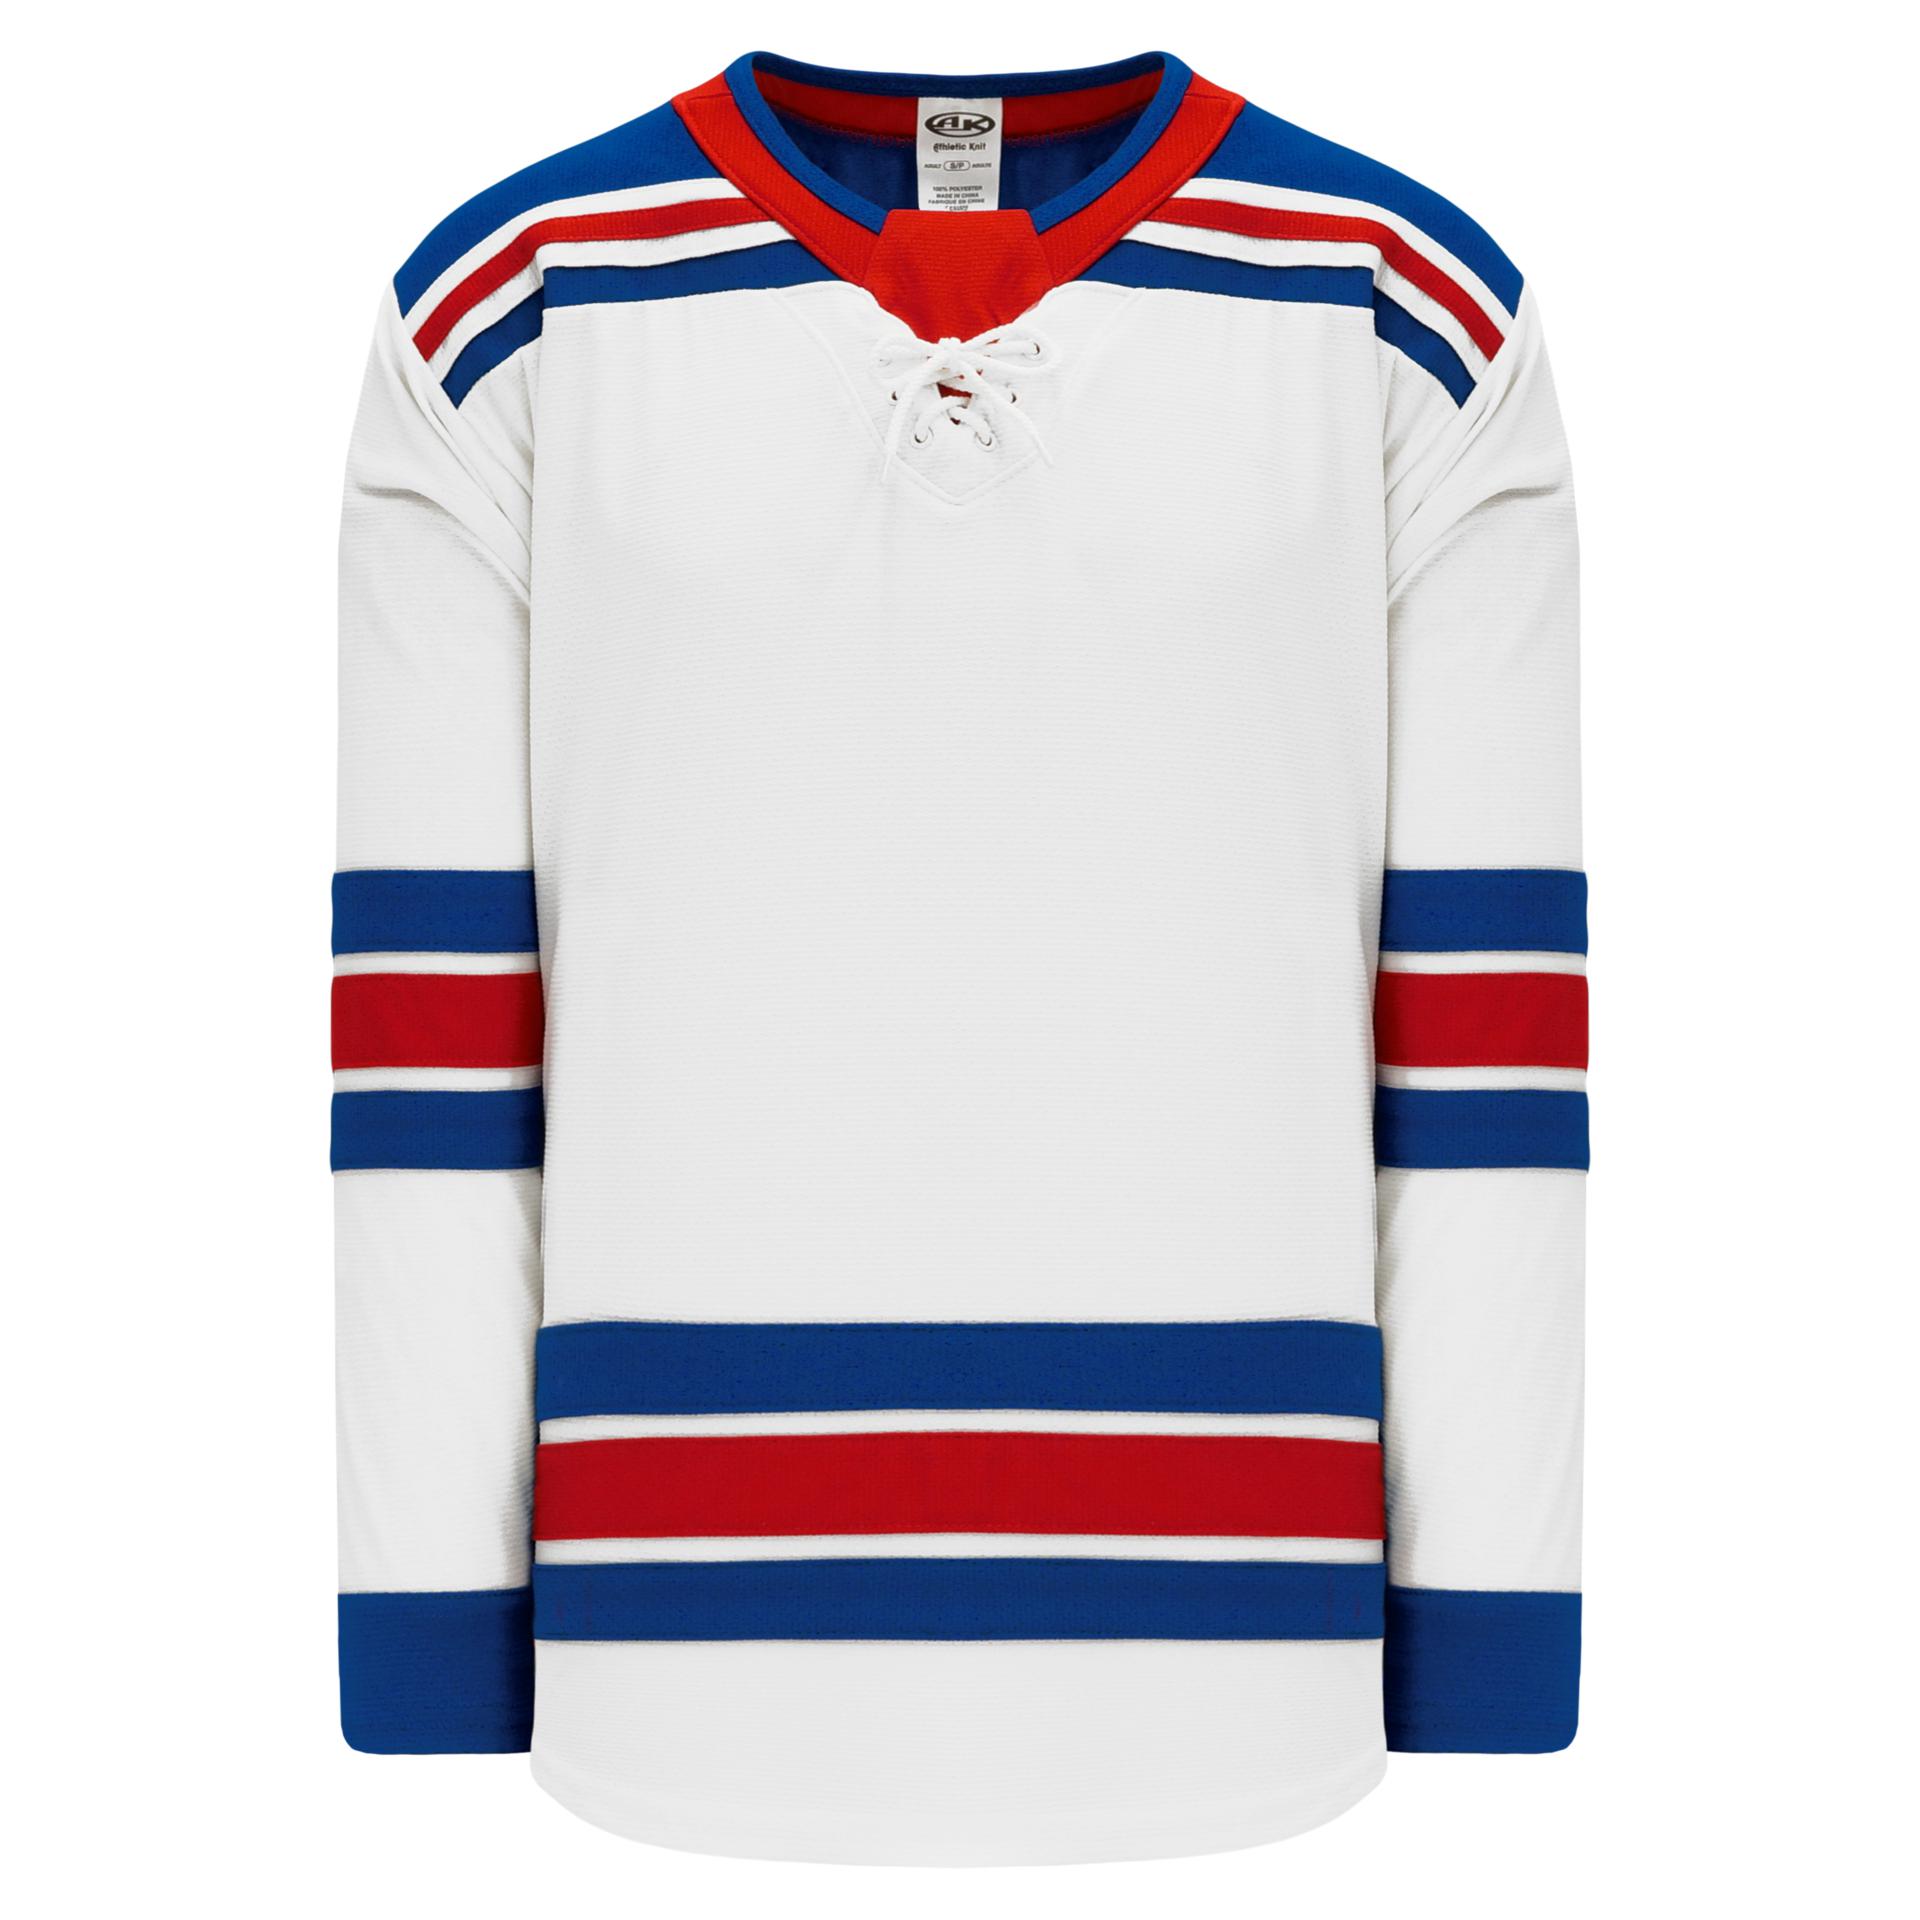 Mr. Throwback - NYI or NYR Black Rangers Jersey XL Islanders Fisherman  Jersey L Tap Picture To Purchase